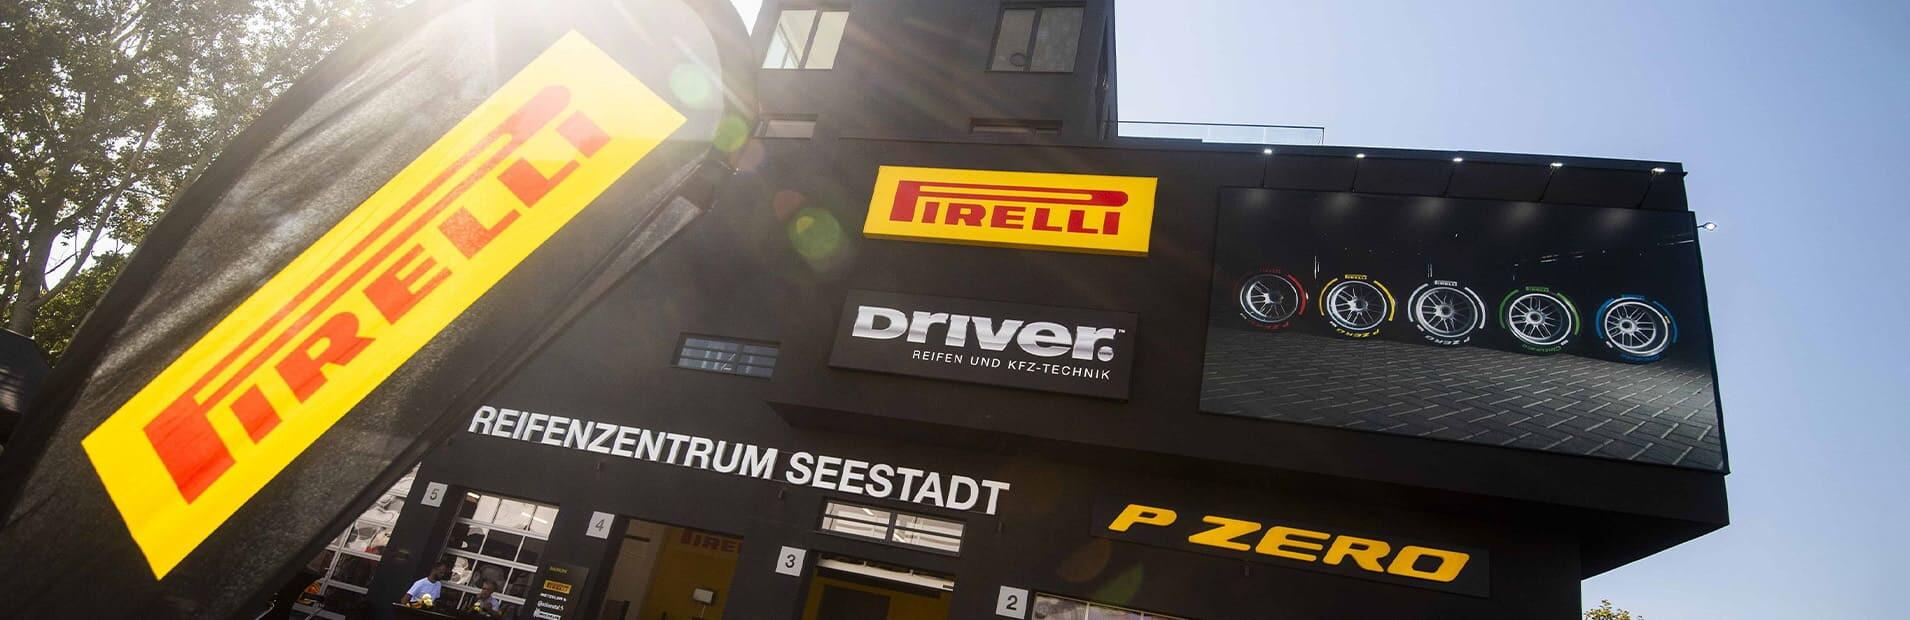 First Driver Flagship Store opens in Austria